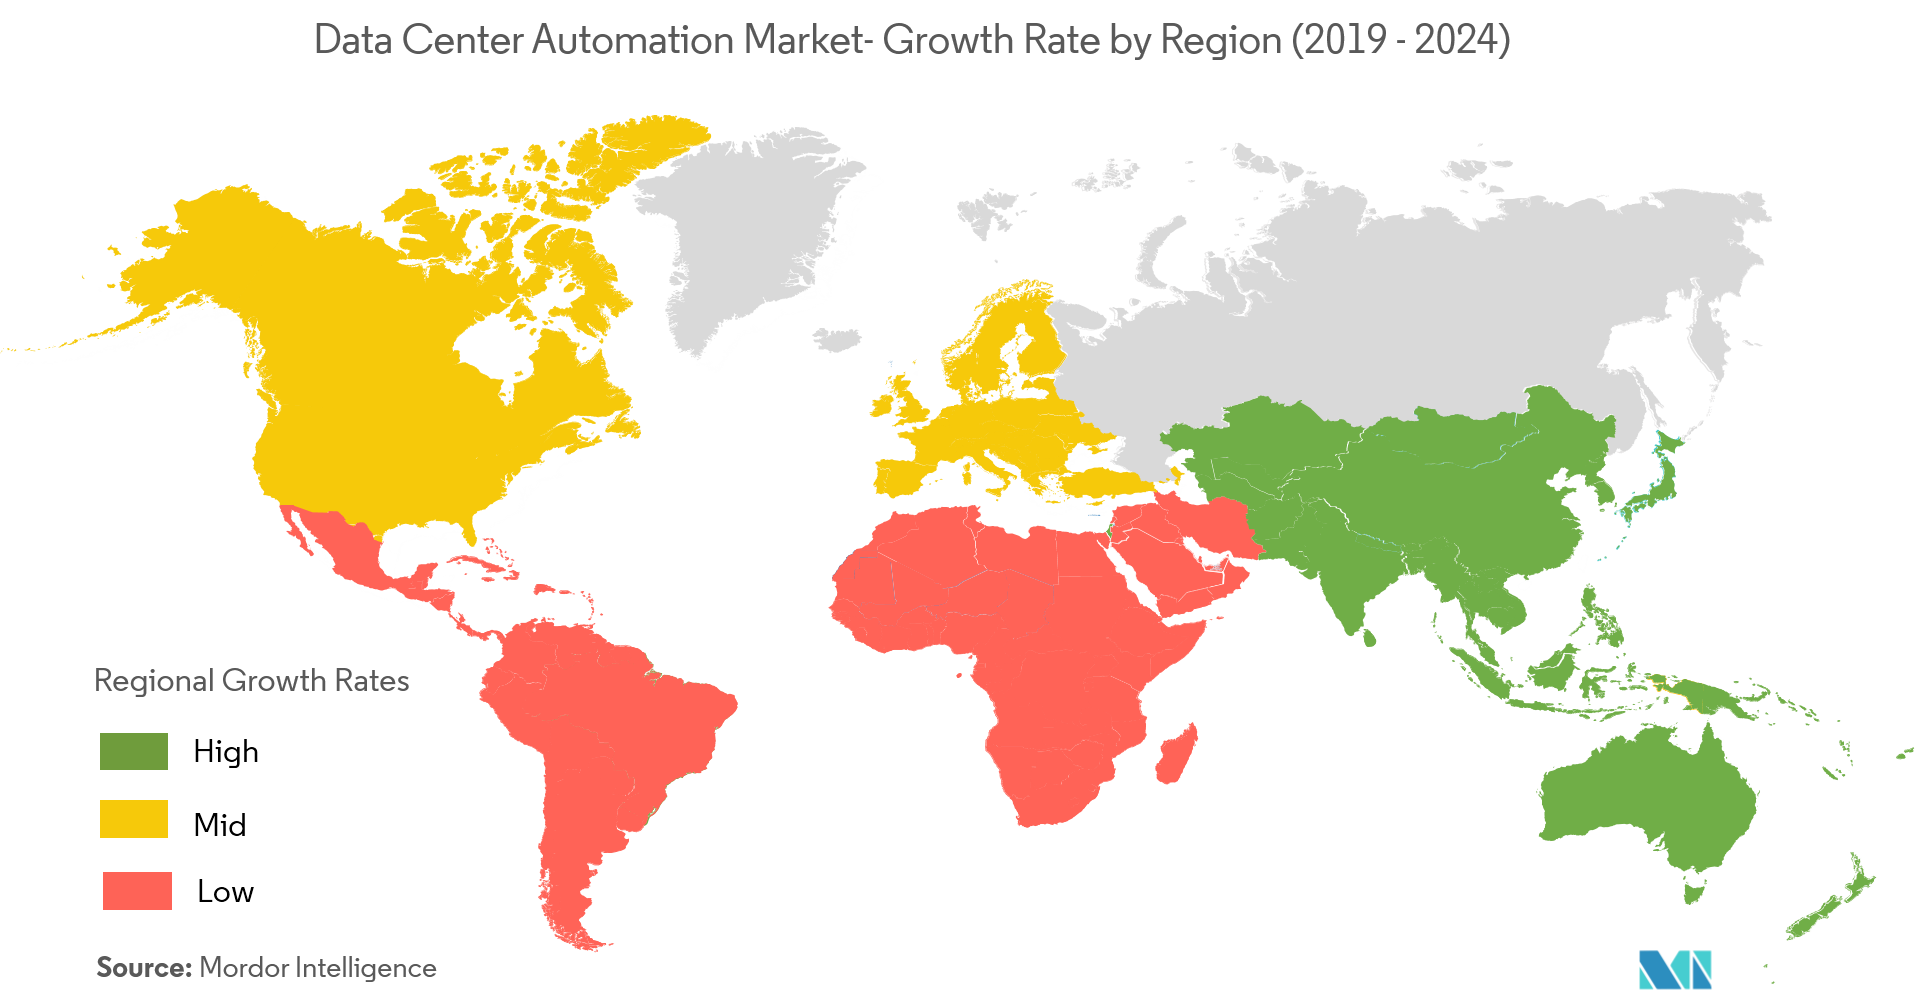  Data Center Automation Market Growth Rate